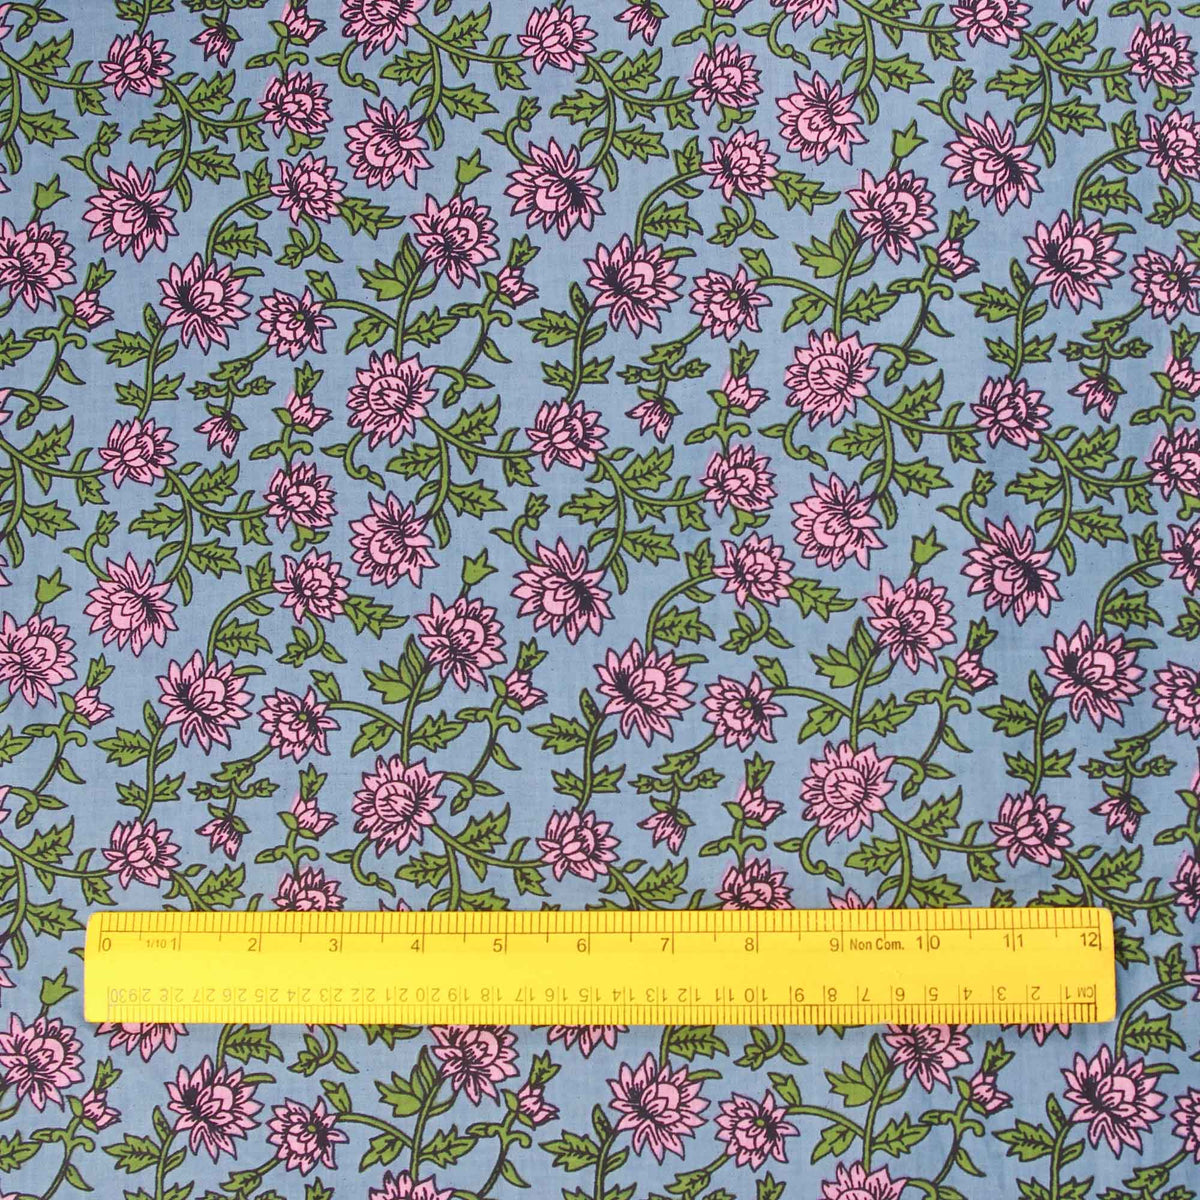 Hand Screen Printed 100% Cotton Fabric -Pink Floral Jaal On Blue (Design 369)